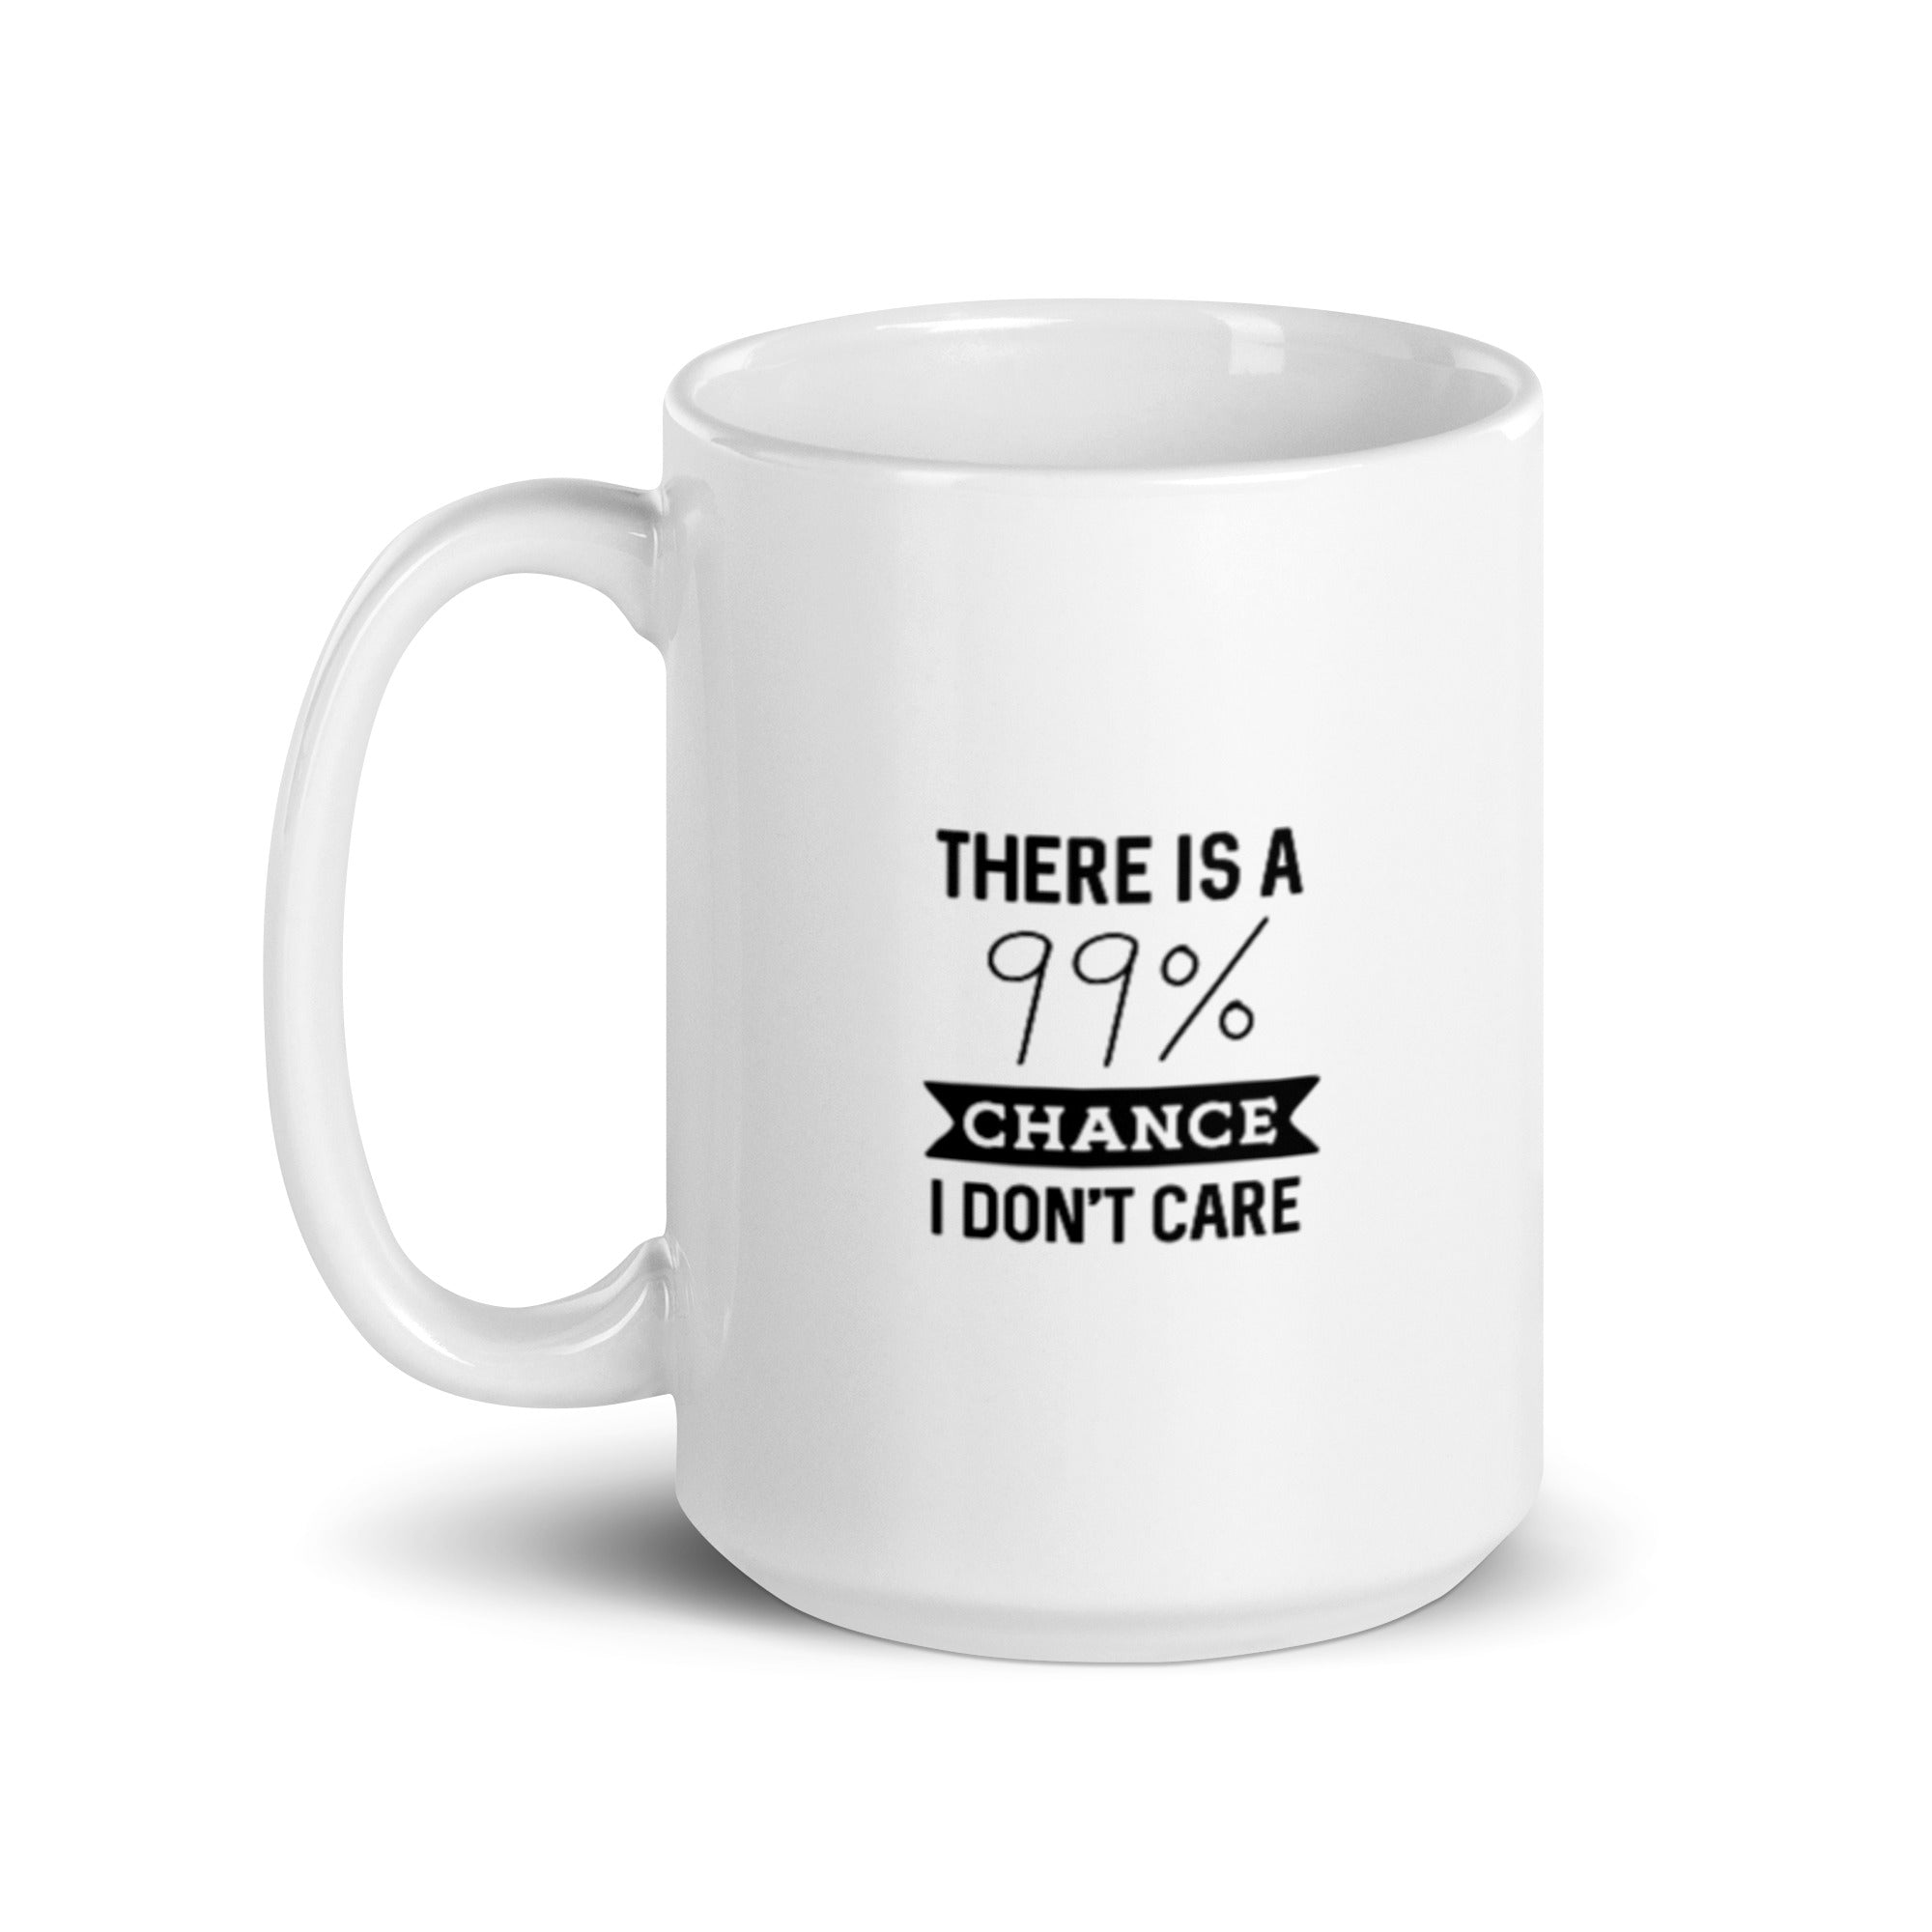 There Is A 99% Chance I Don't Care - White glossy mug